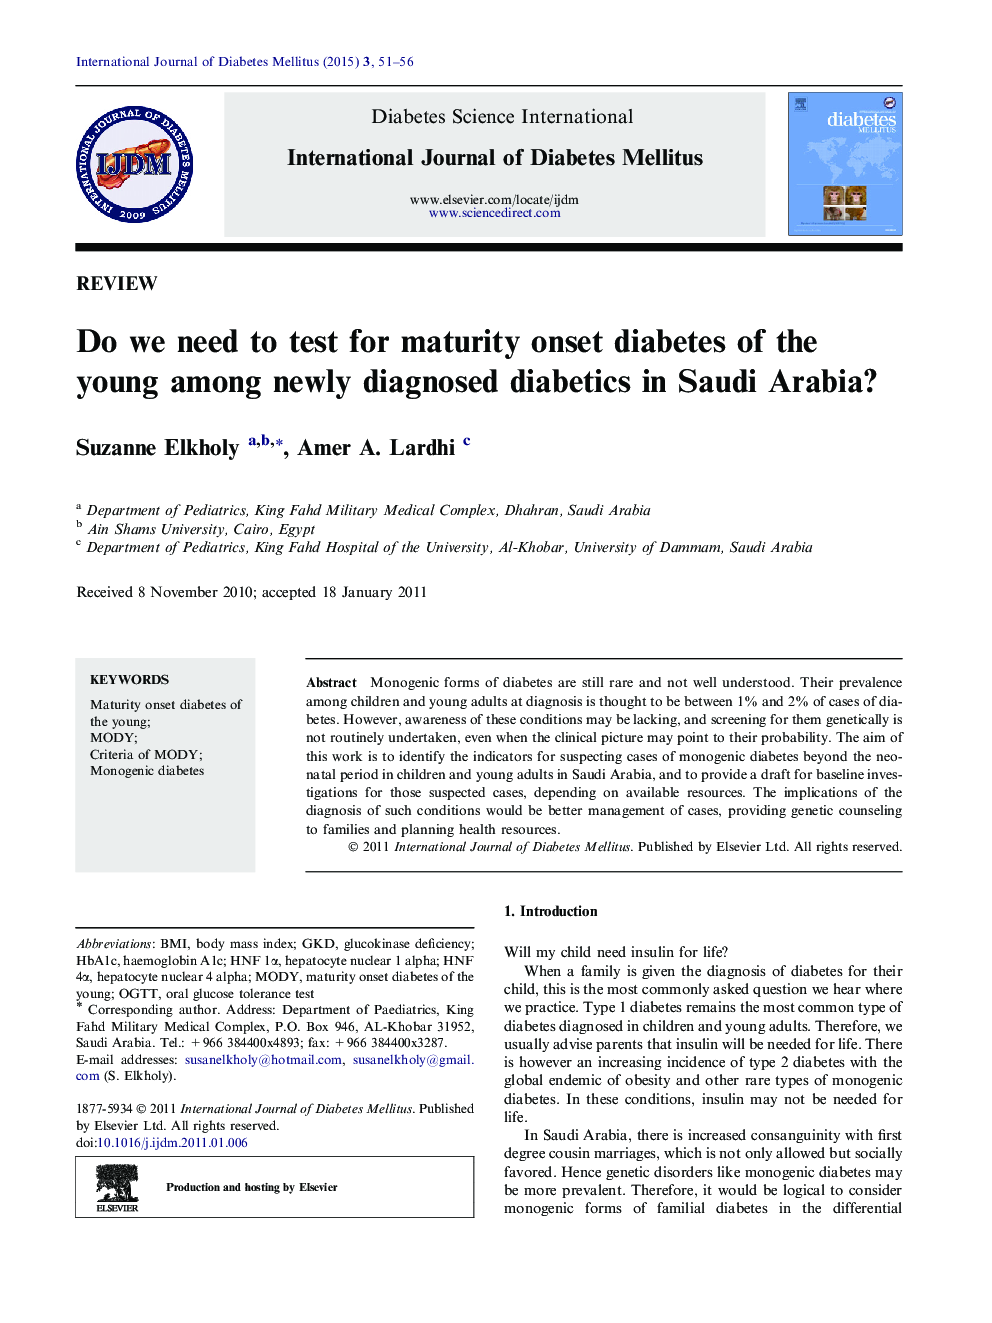 Do we need to test for maturity onset diabetes of the young among newly diagnosed diabetics in Saudi Arabia?